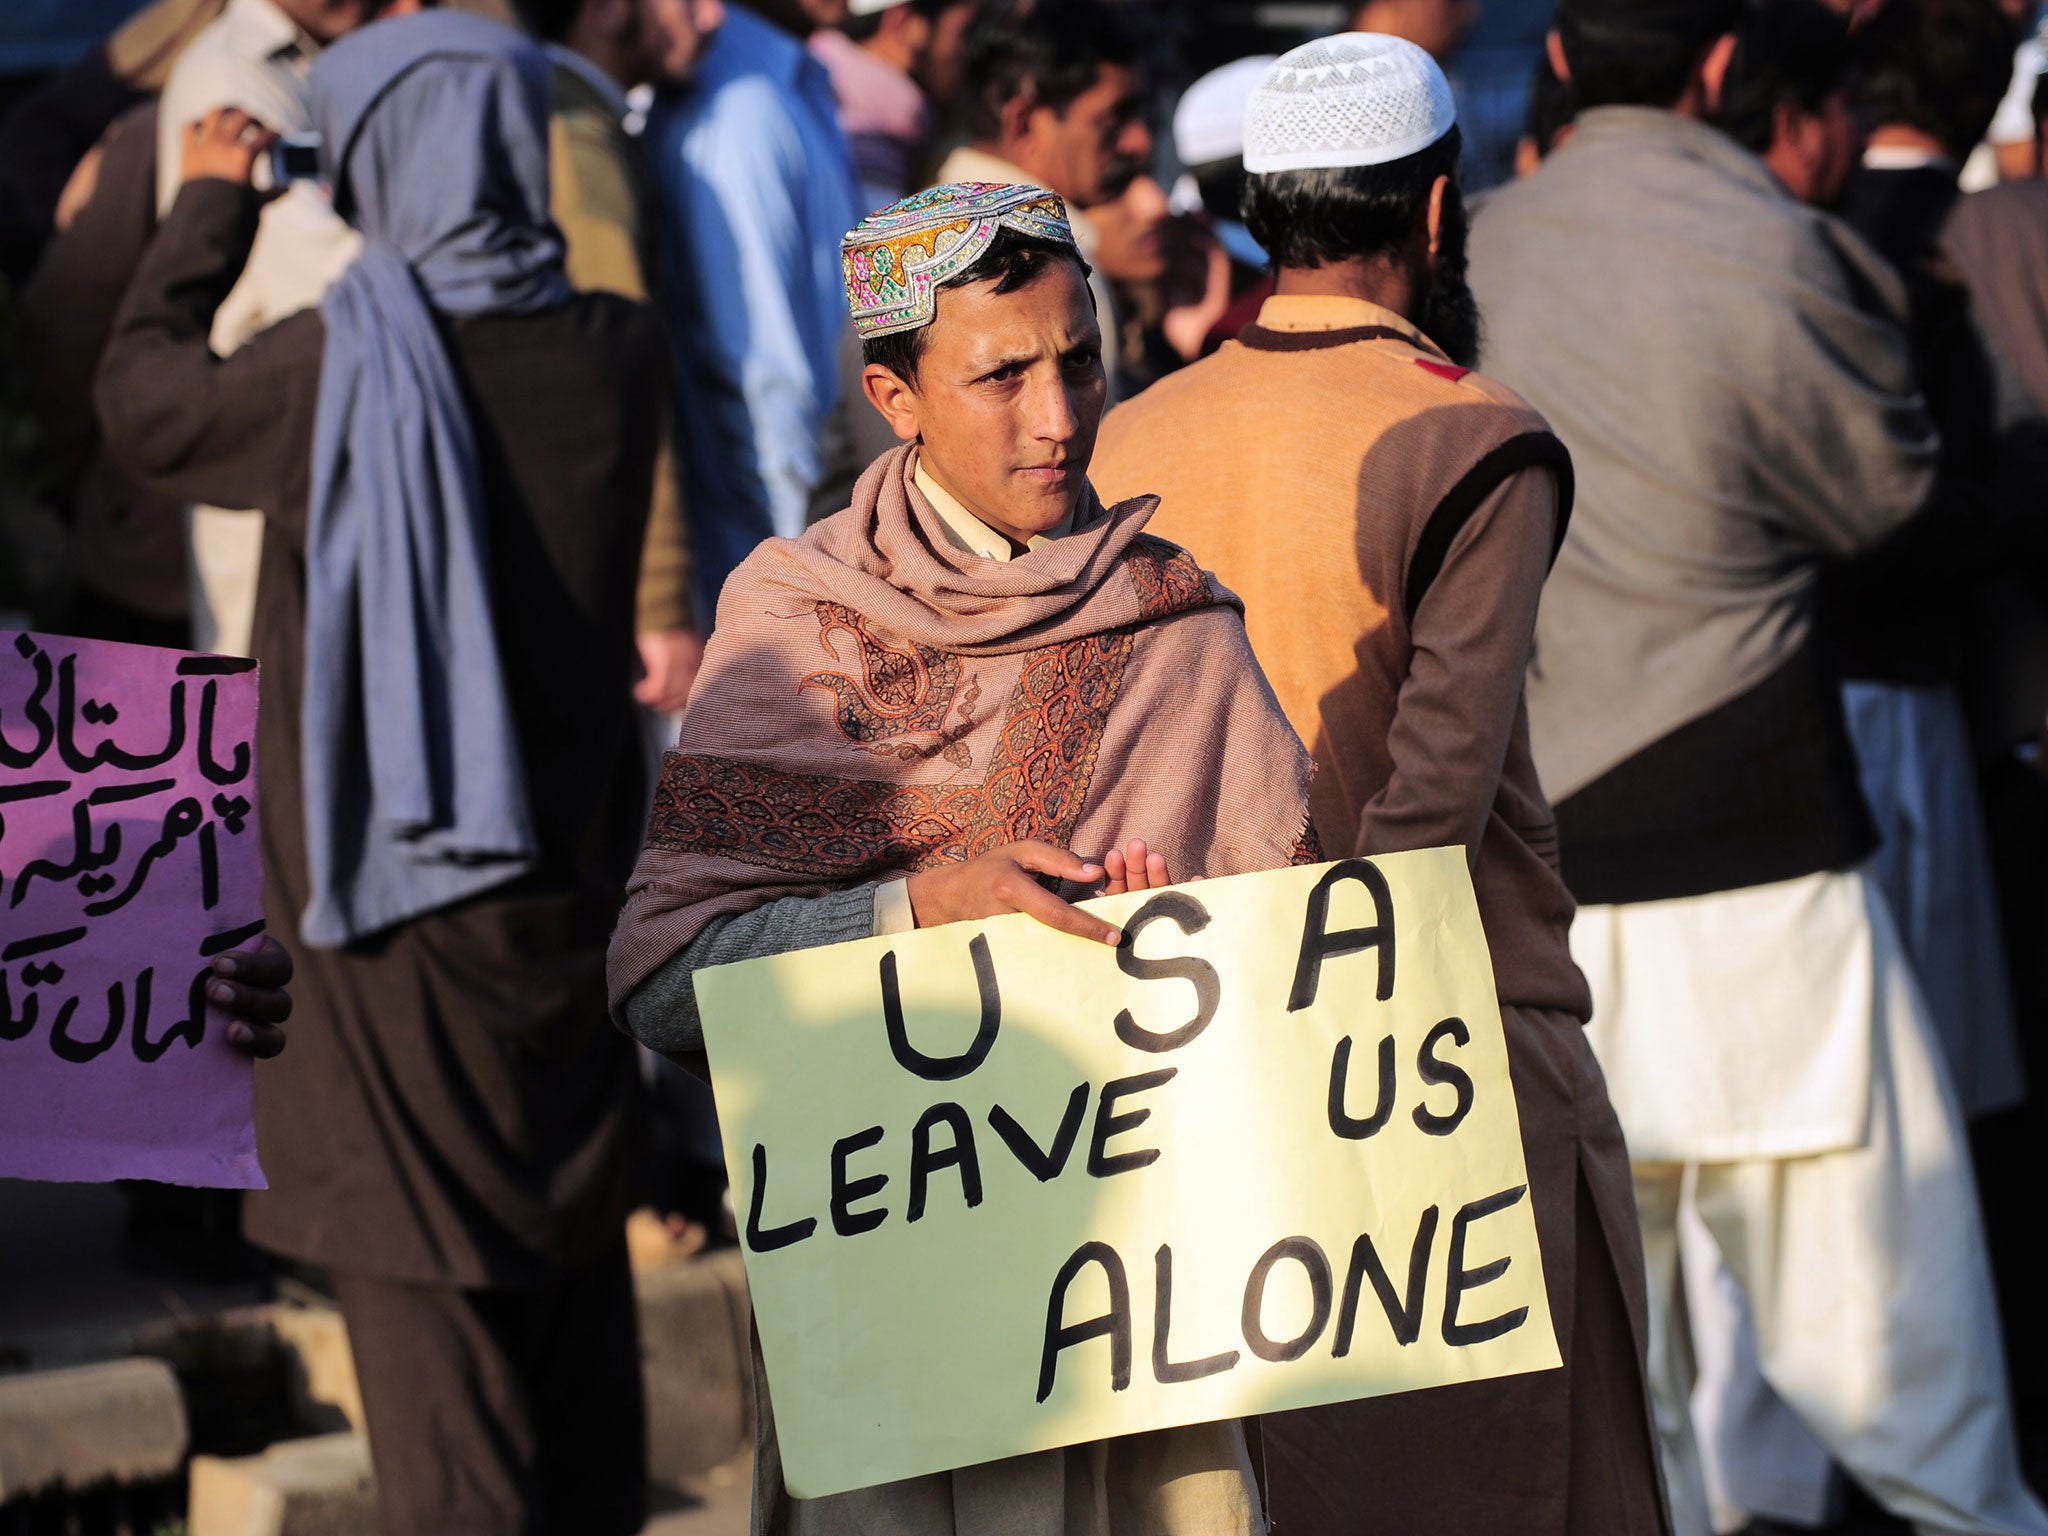 A Pakistani boy during a protest against US drone attacks on North Waziristan in Islamabad on December 10, 2010